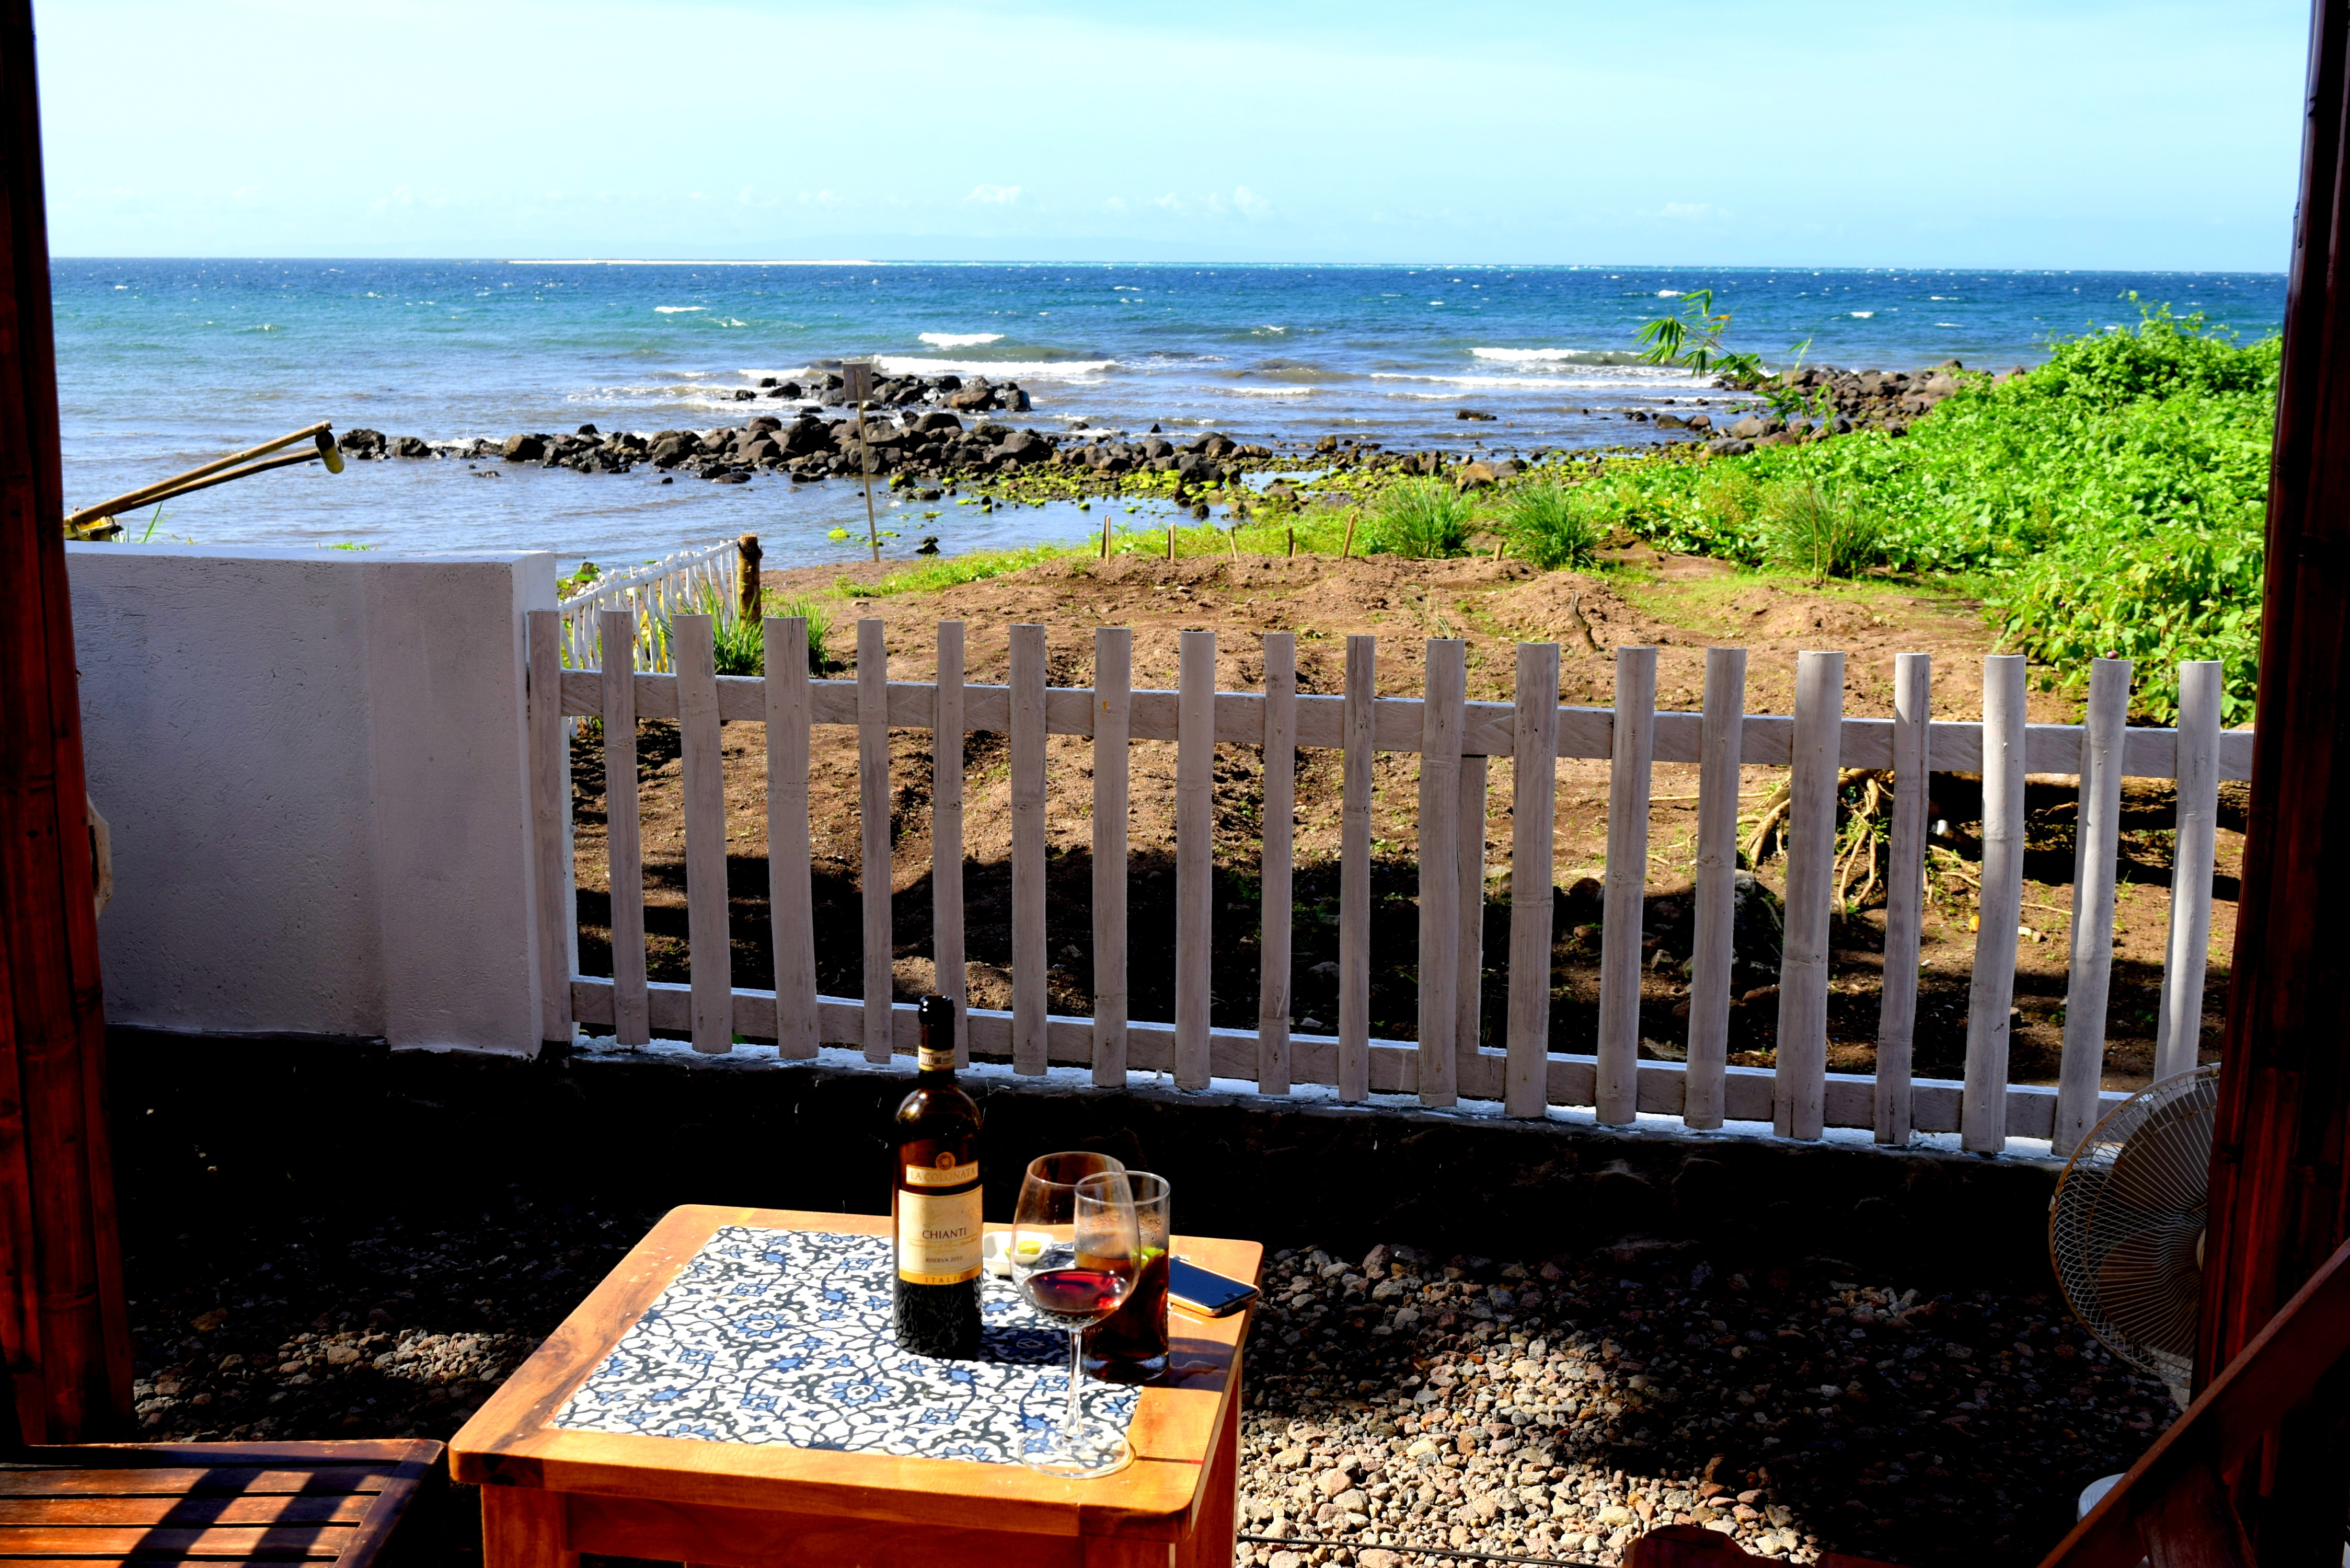 Your patio at the Guerrera beach villa. White island is just on the horizon and the fisherman park right next to your white picket fence.